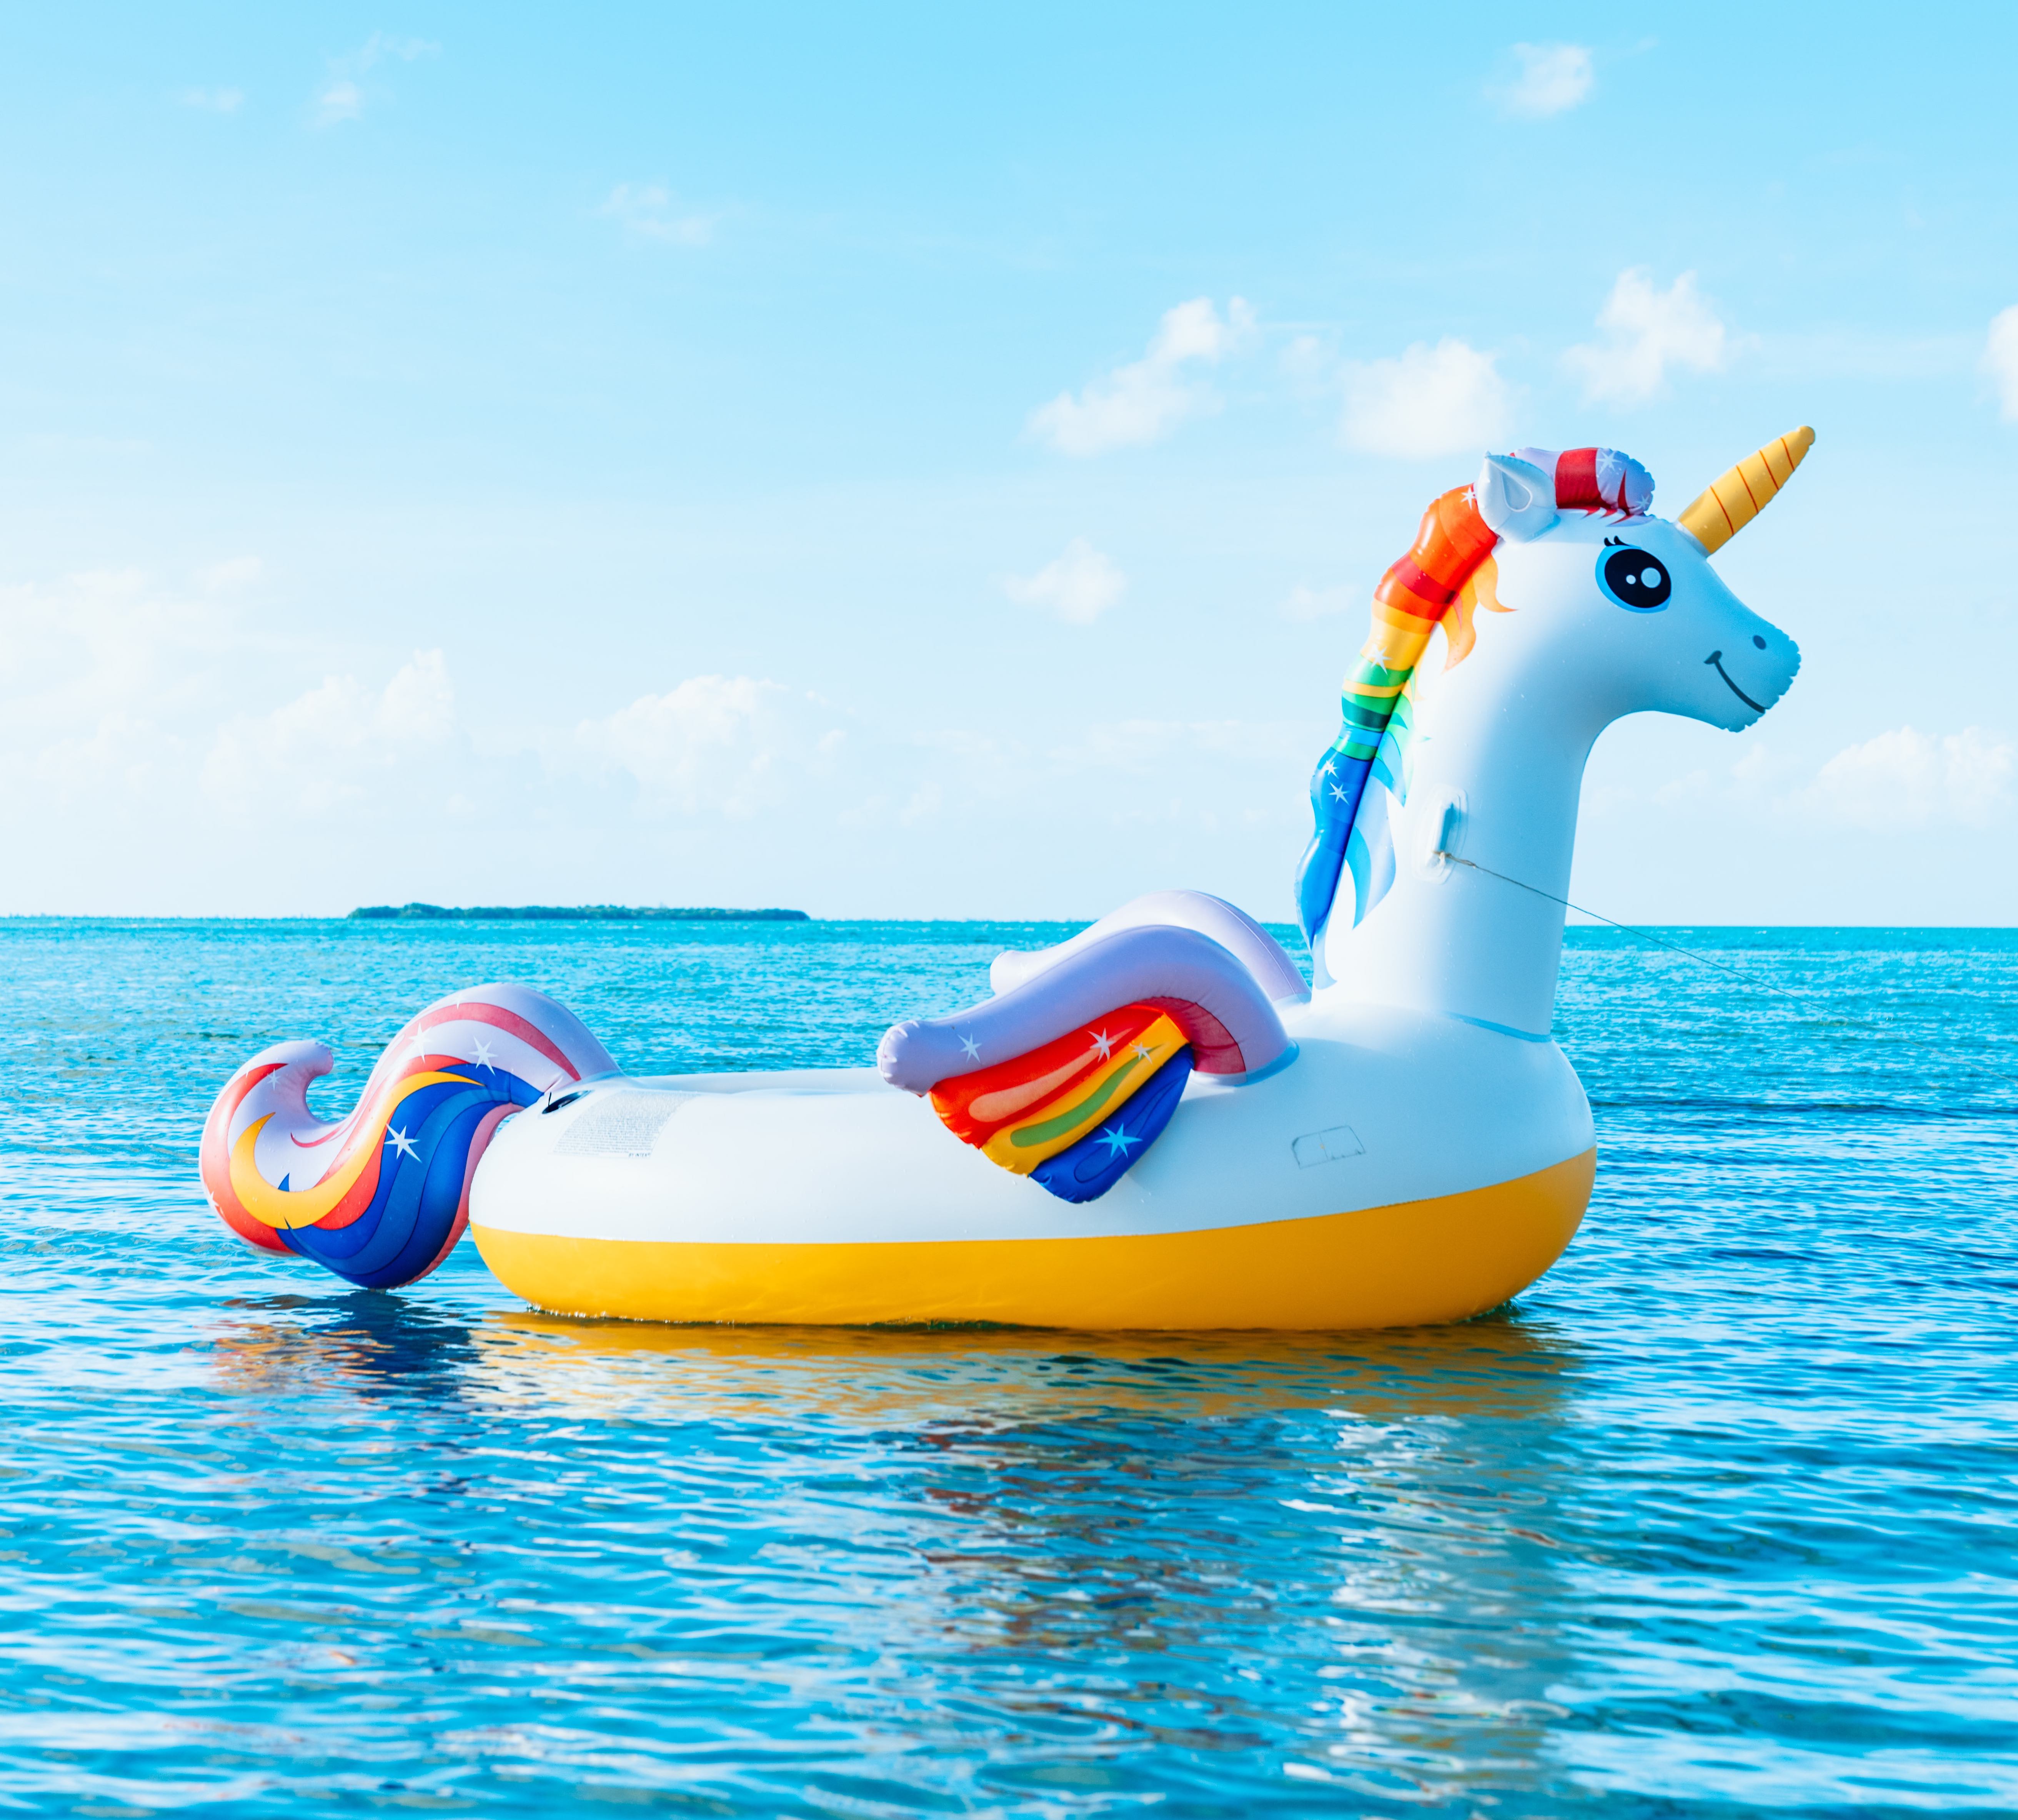 An inflatable unicorn floating in the sea